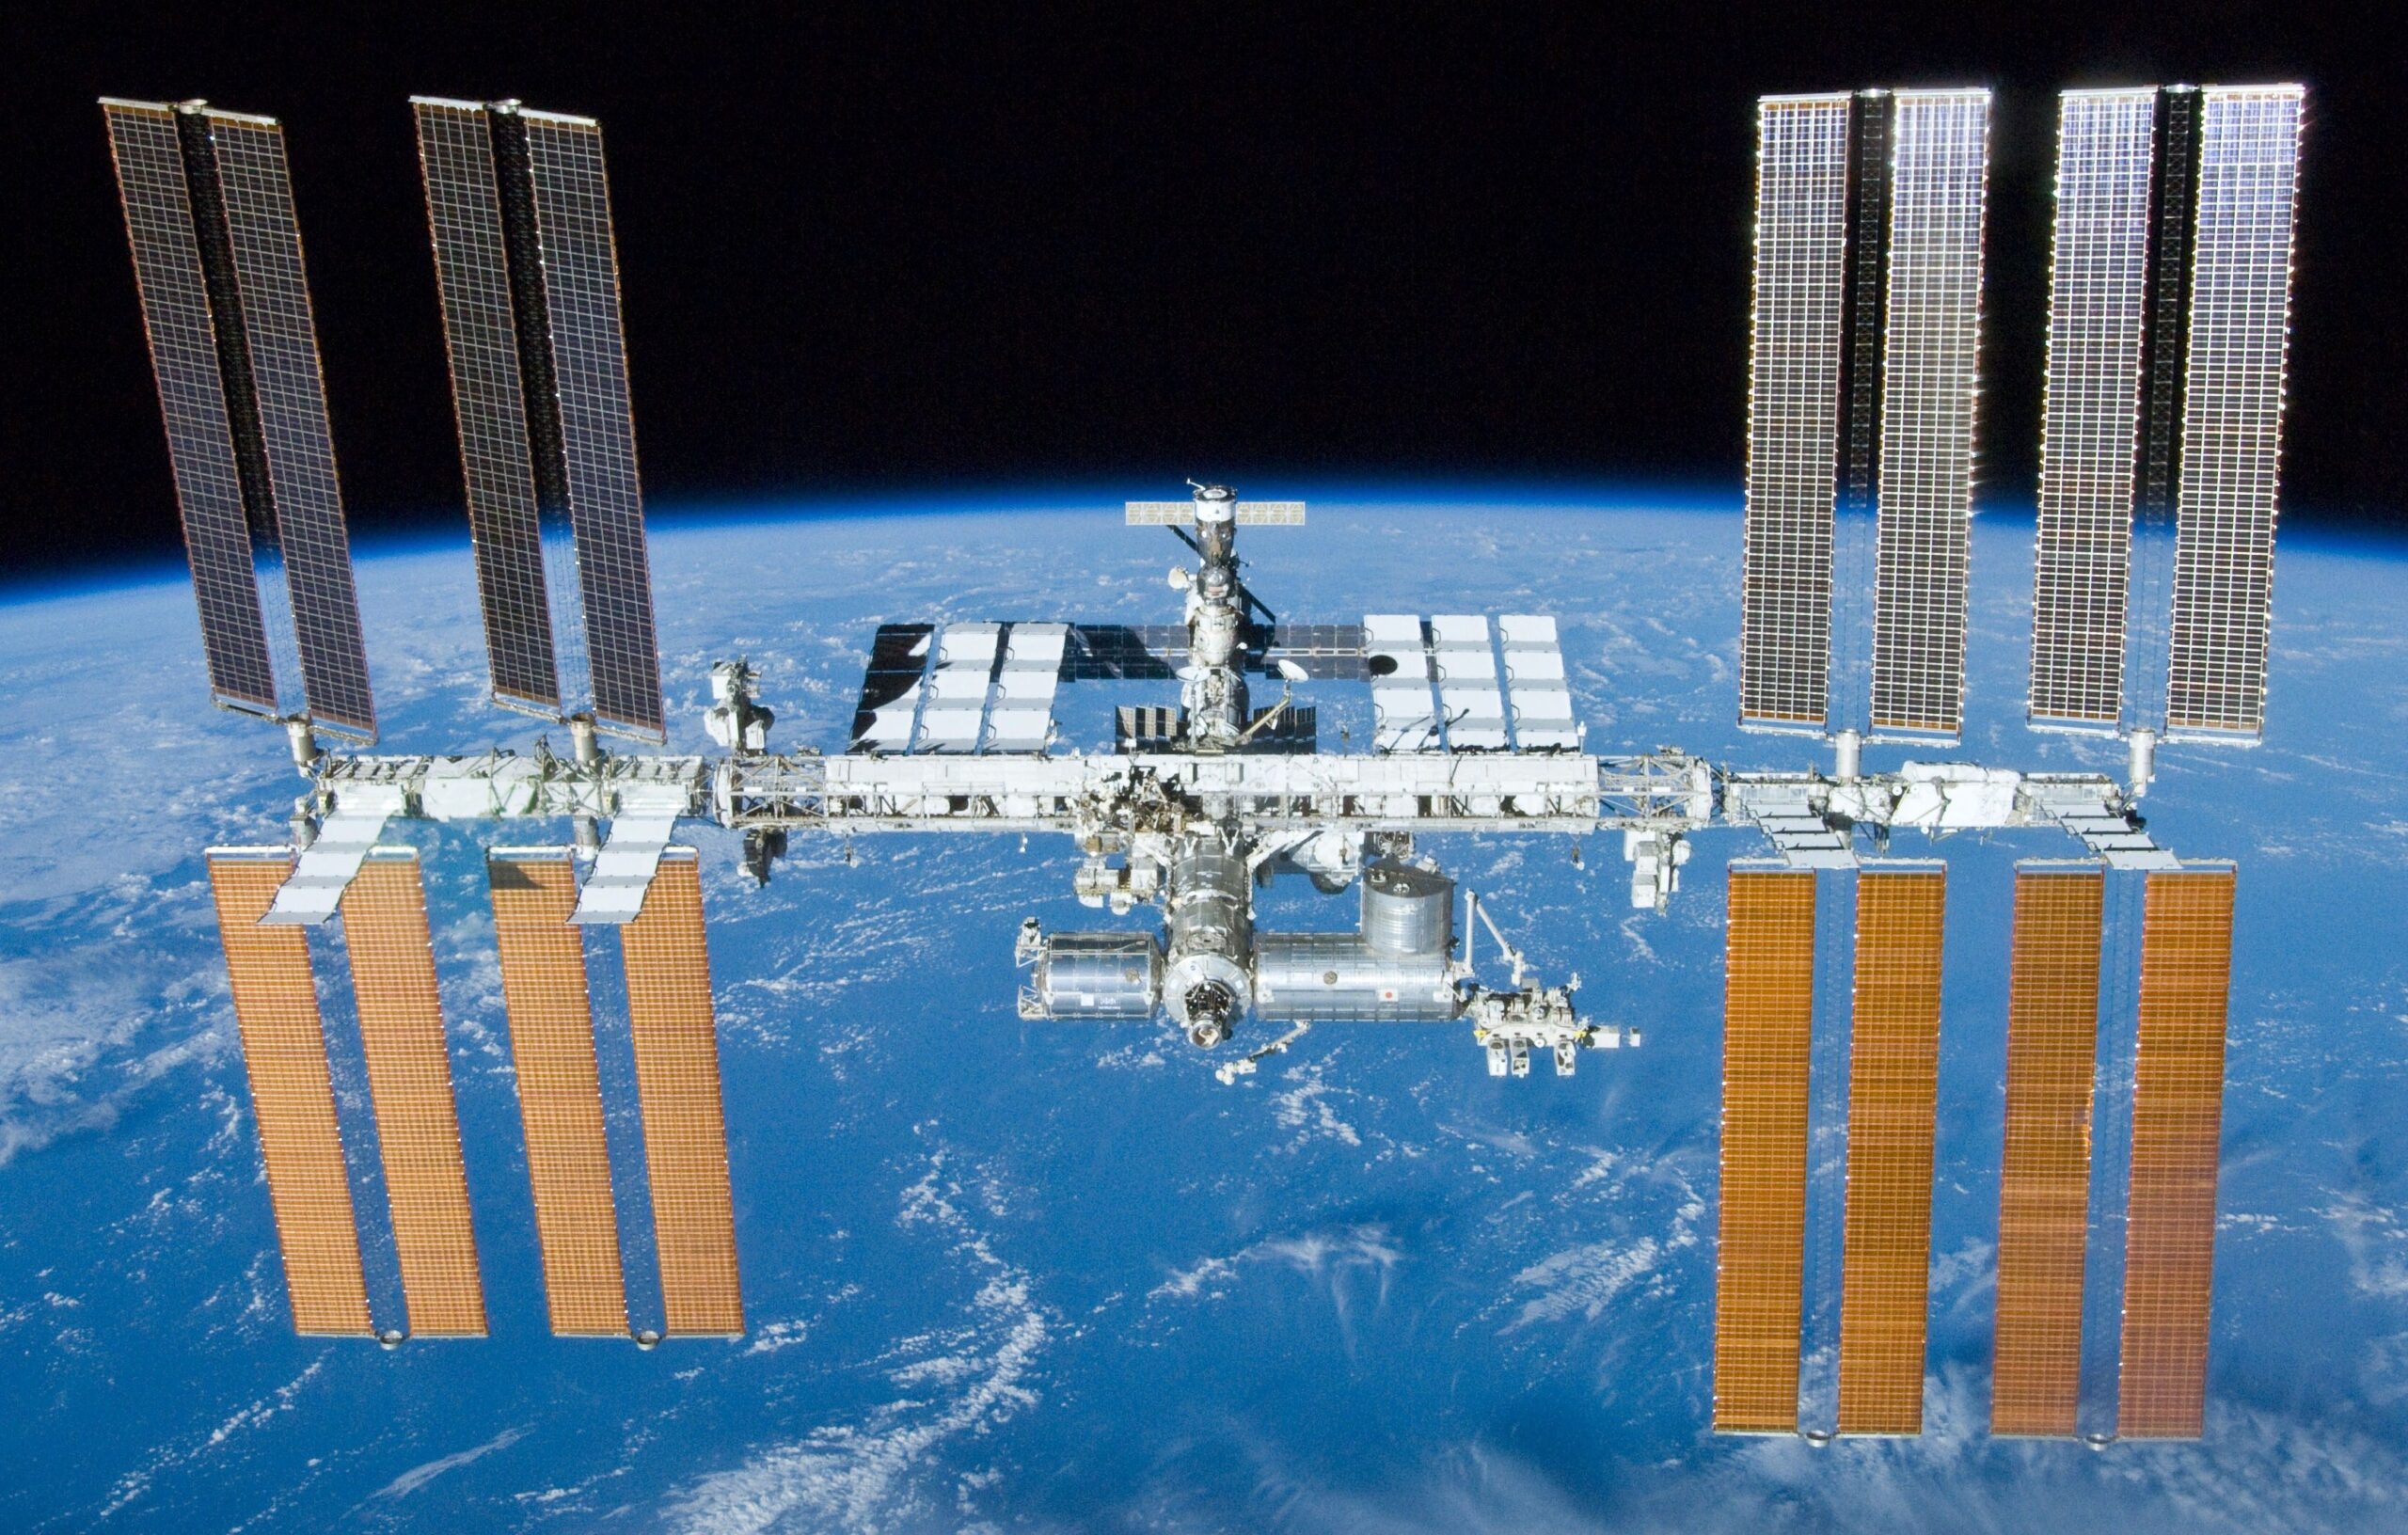 15 years on International Space Station #15YearsOnStation